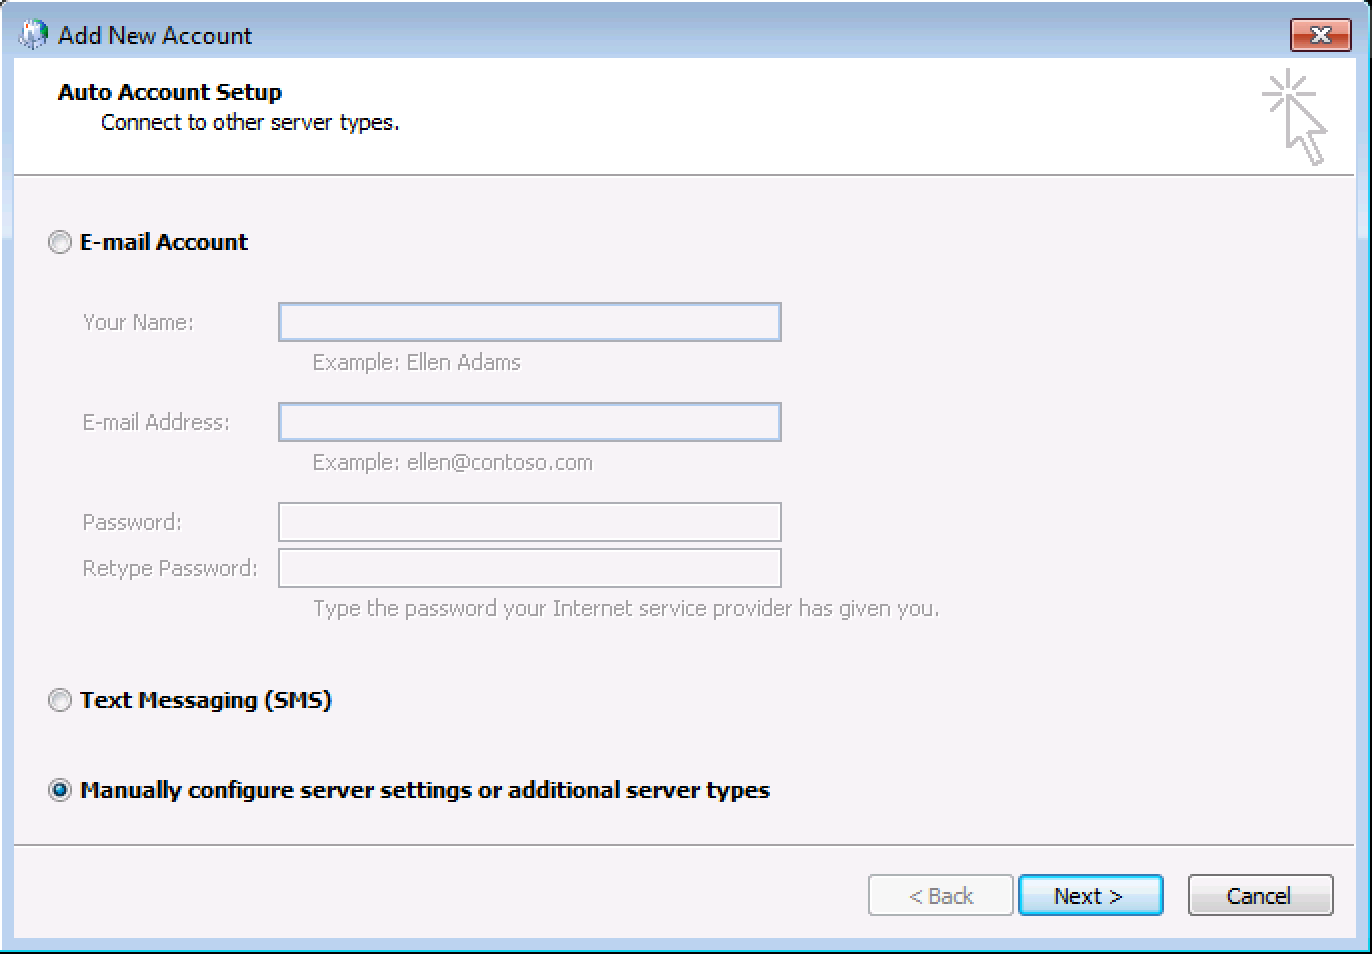 Select Manually configure server settings or additional server types, click Next